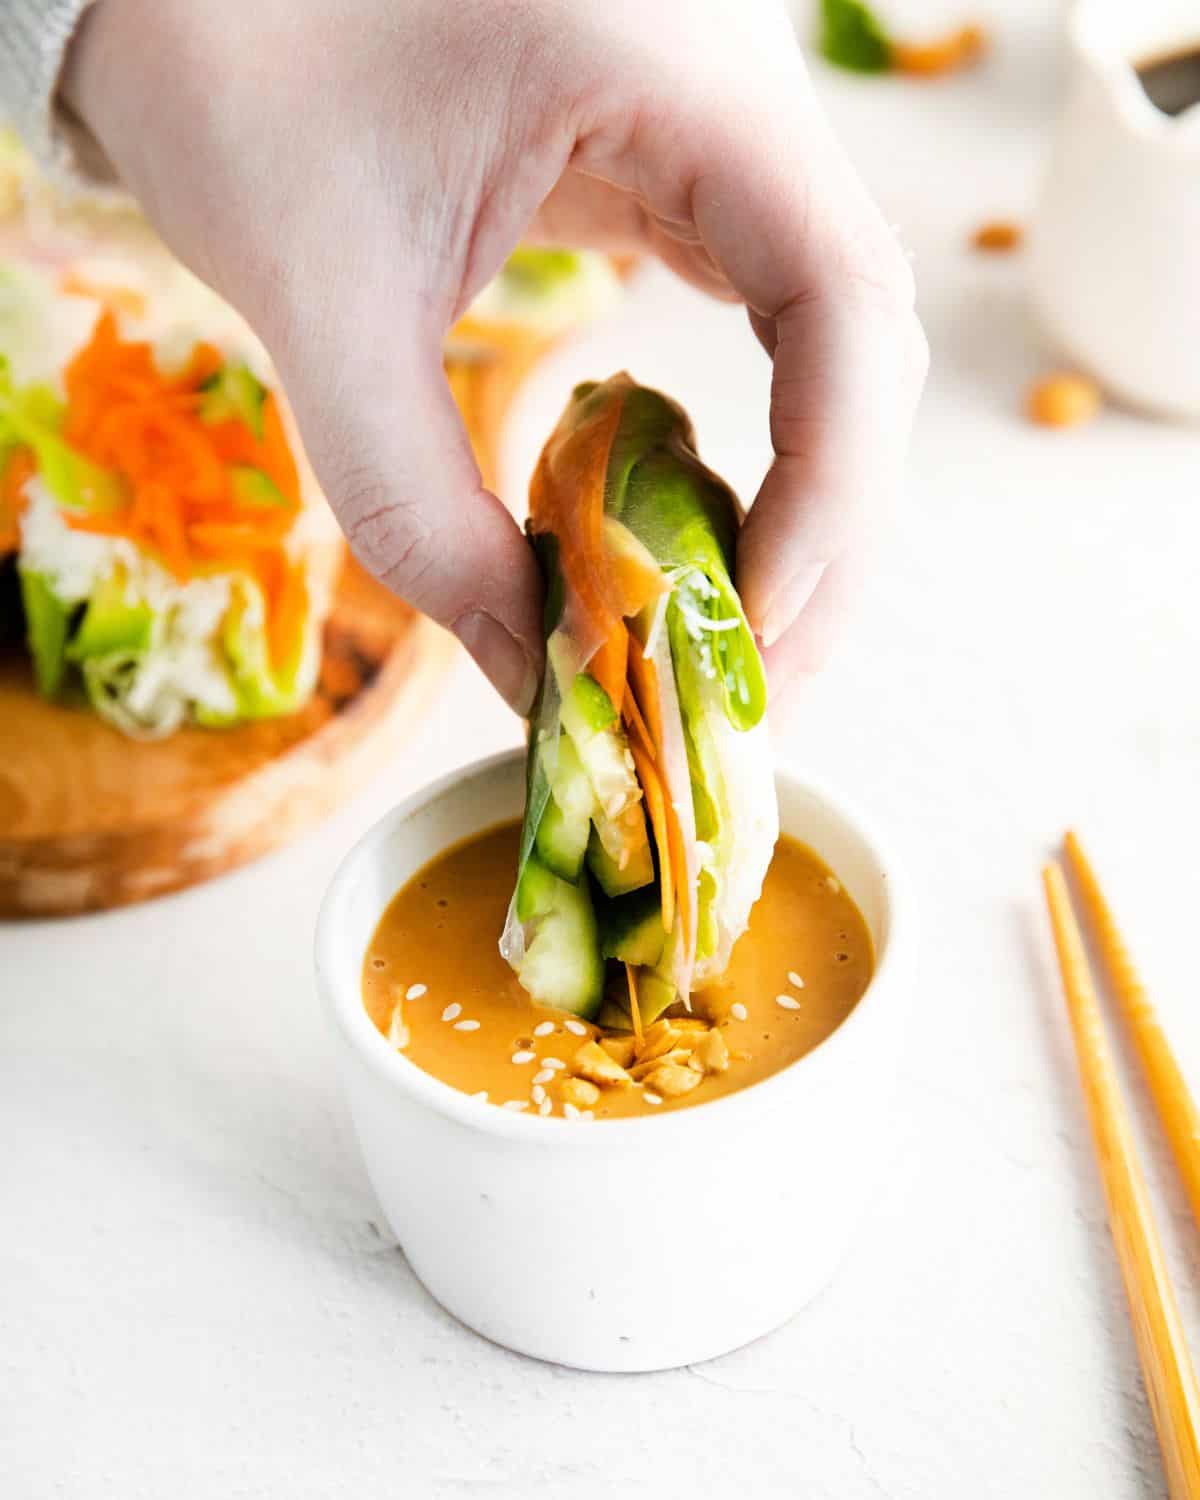 Spring rolls are dipped into a peanut sauce.